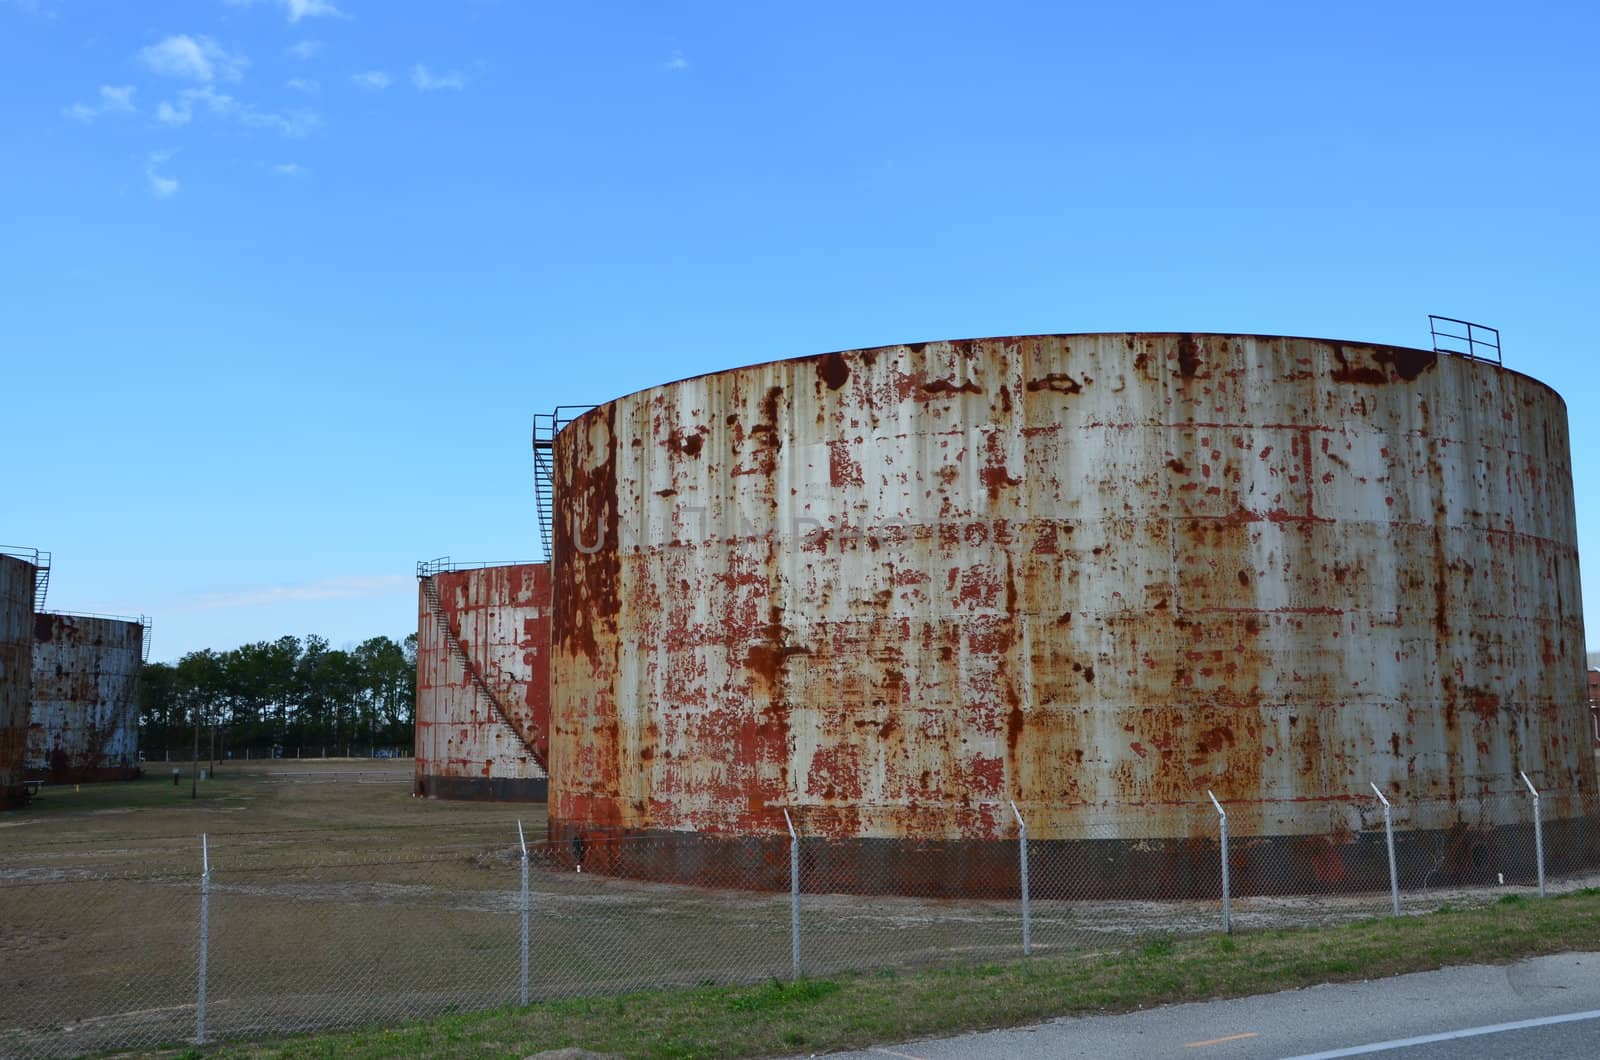 Rusted oil storage tanks shown up close.